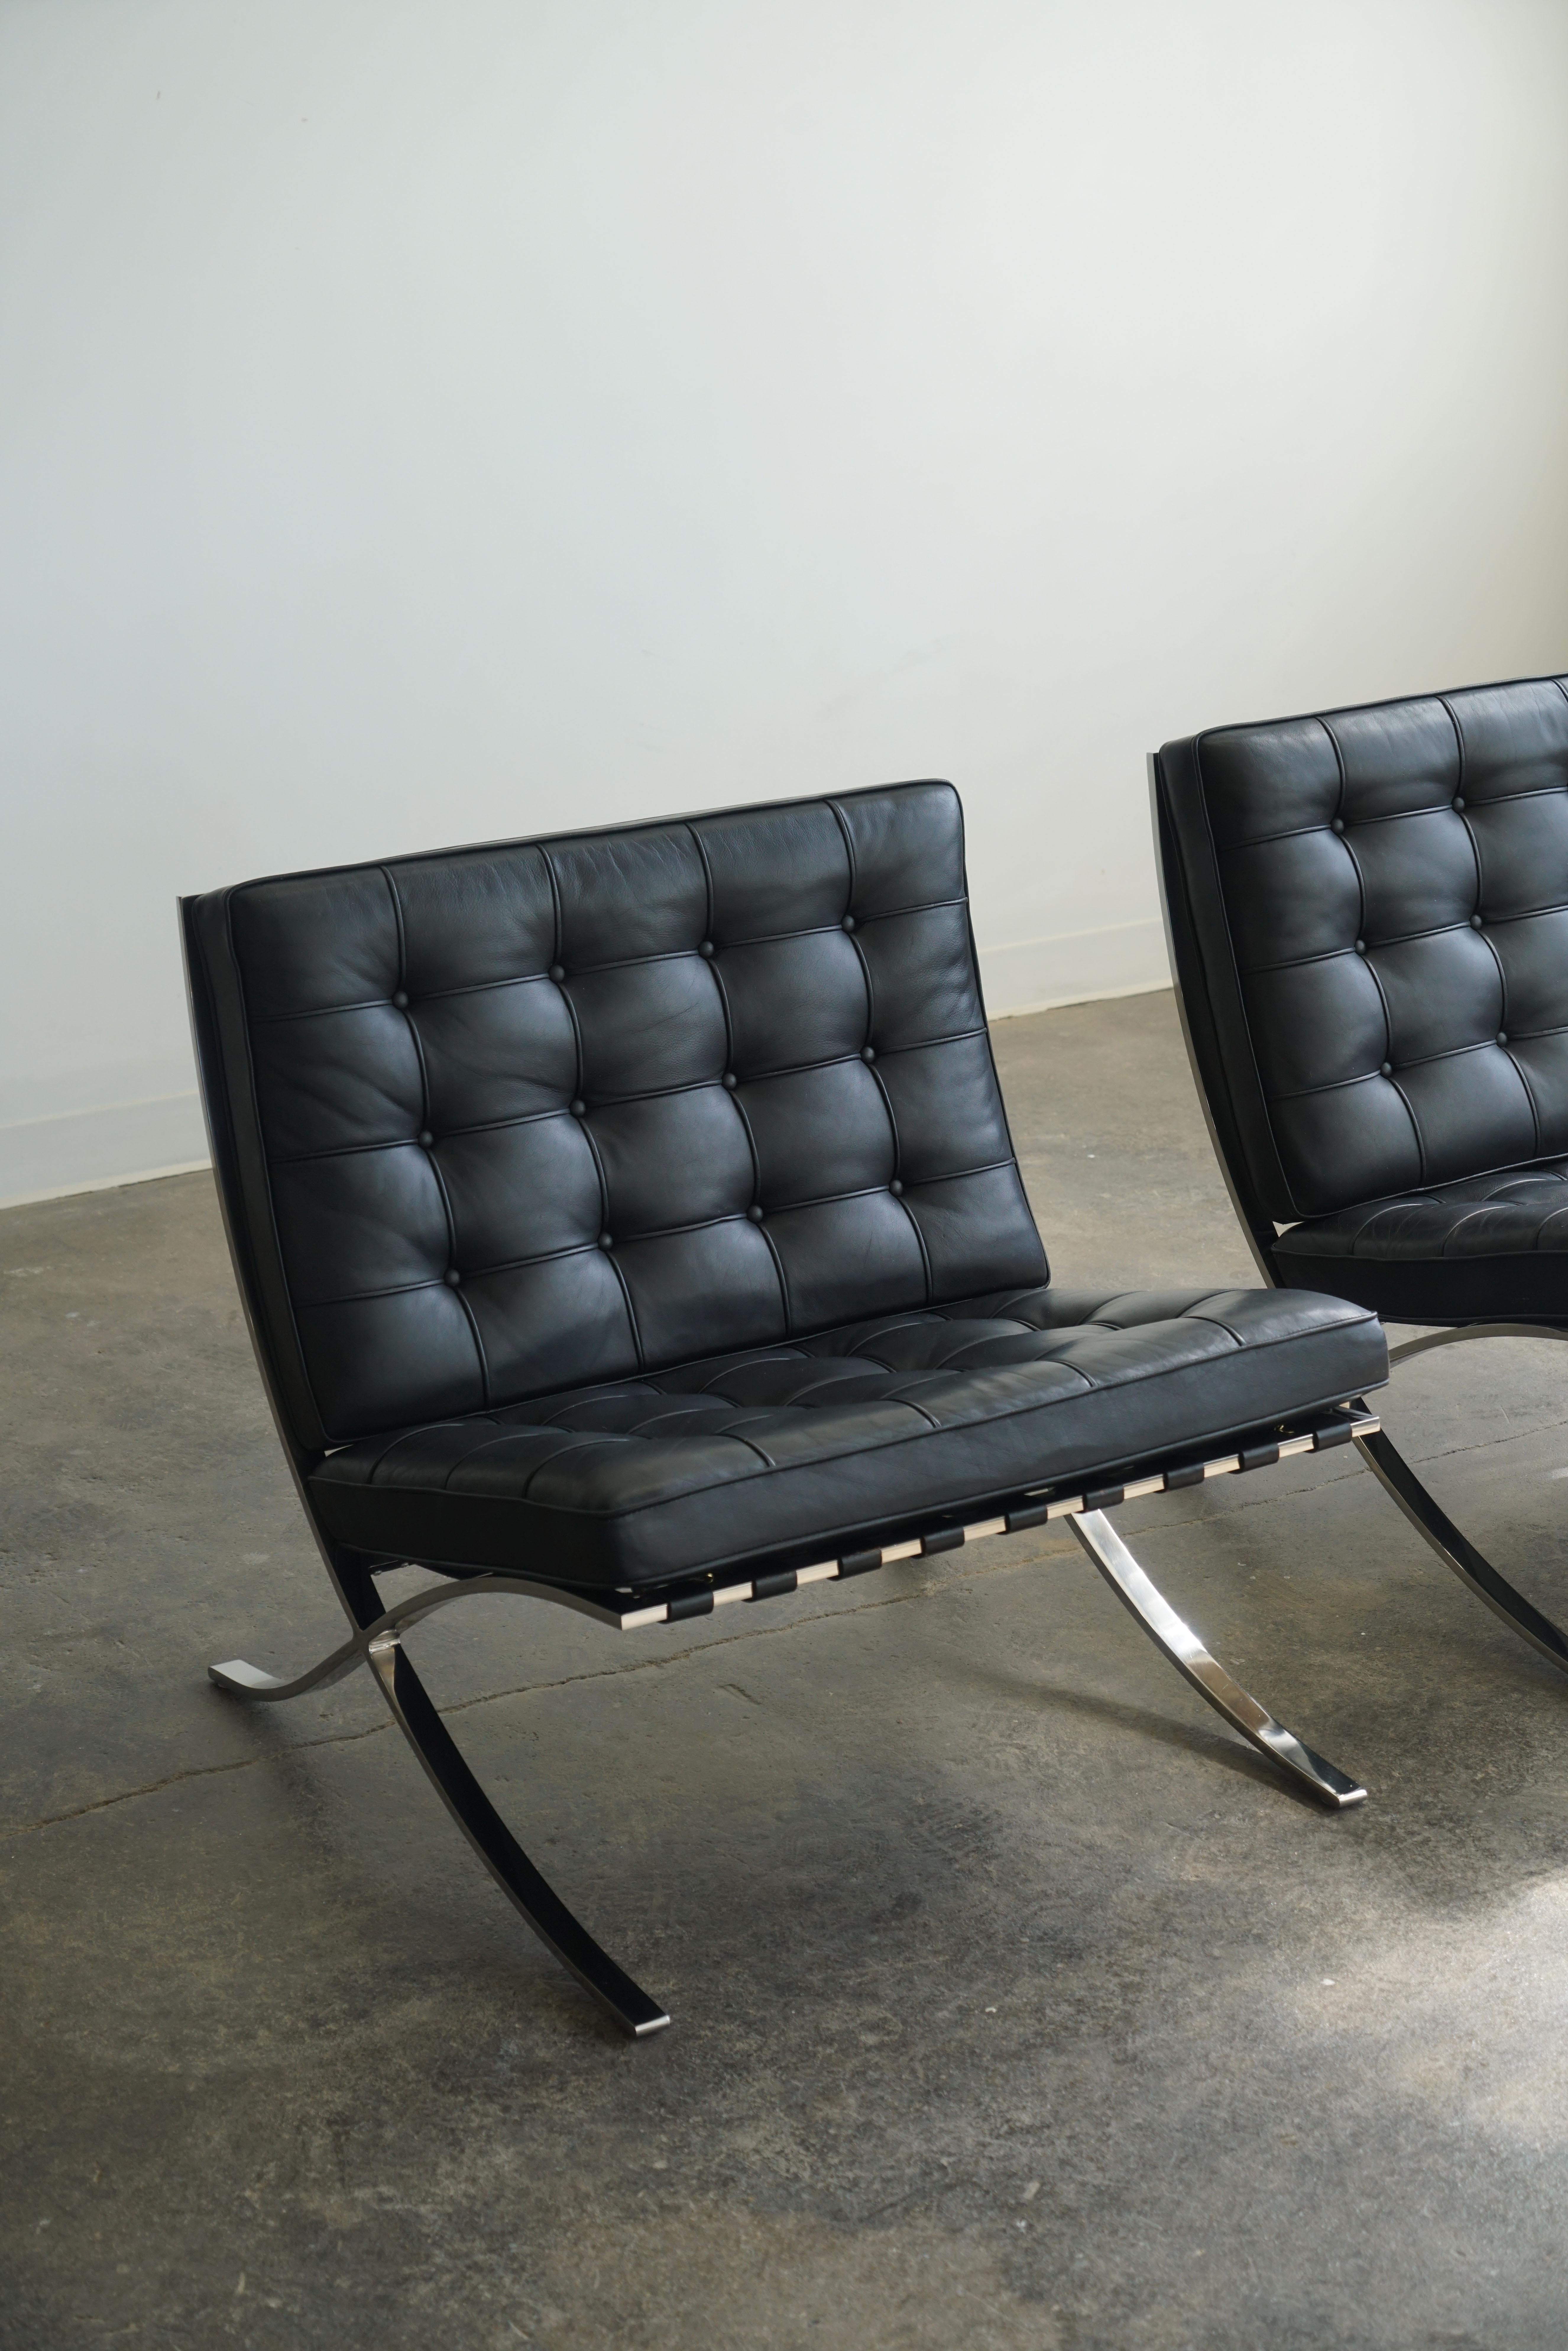 Knoll Barcelona Lounge Chairs by Mies van der Rohe, Black Leather  In Good Condition For Sale In Chicago, IL